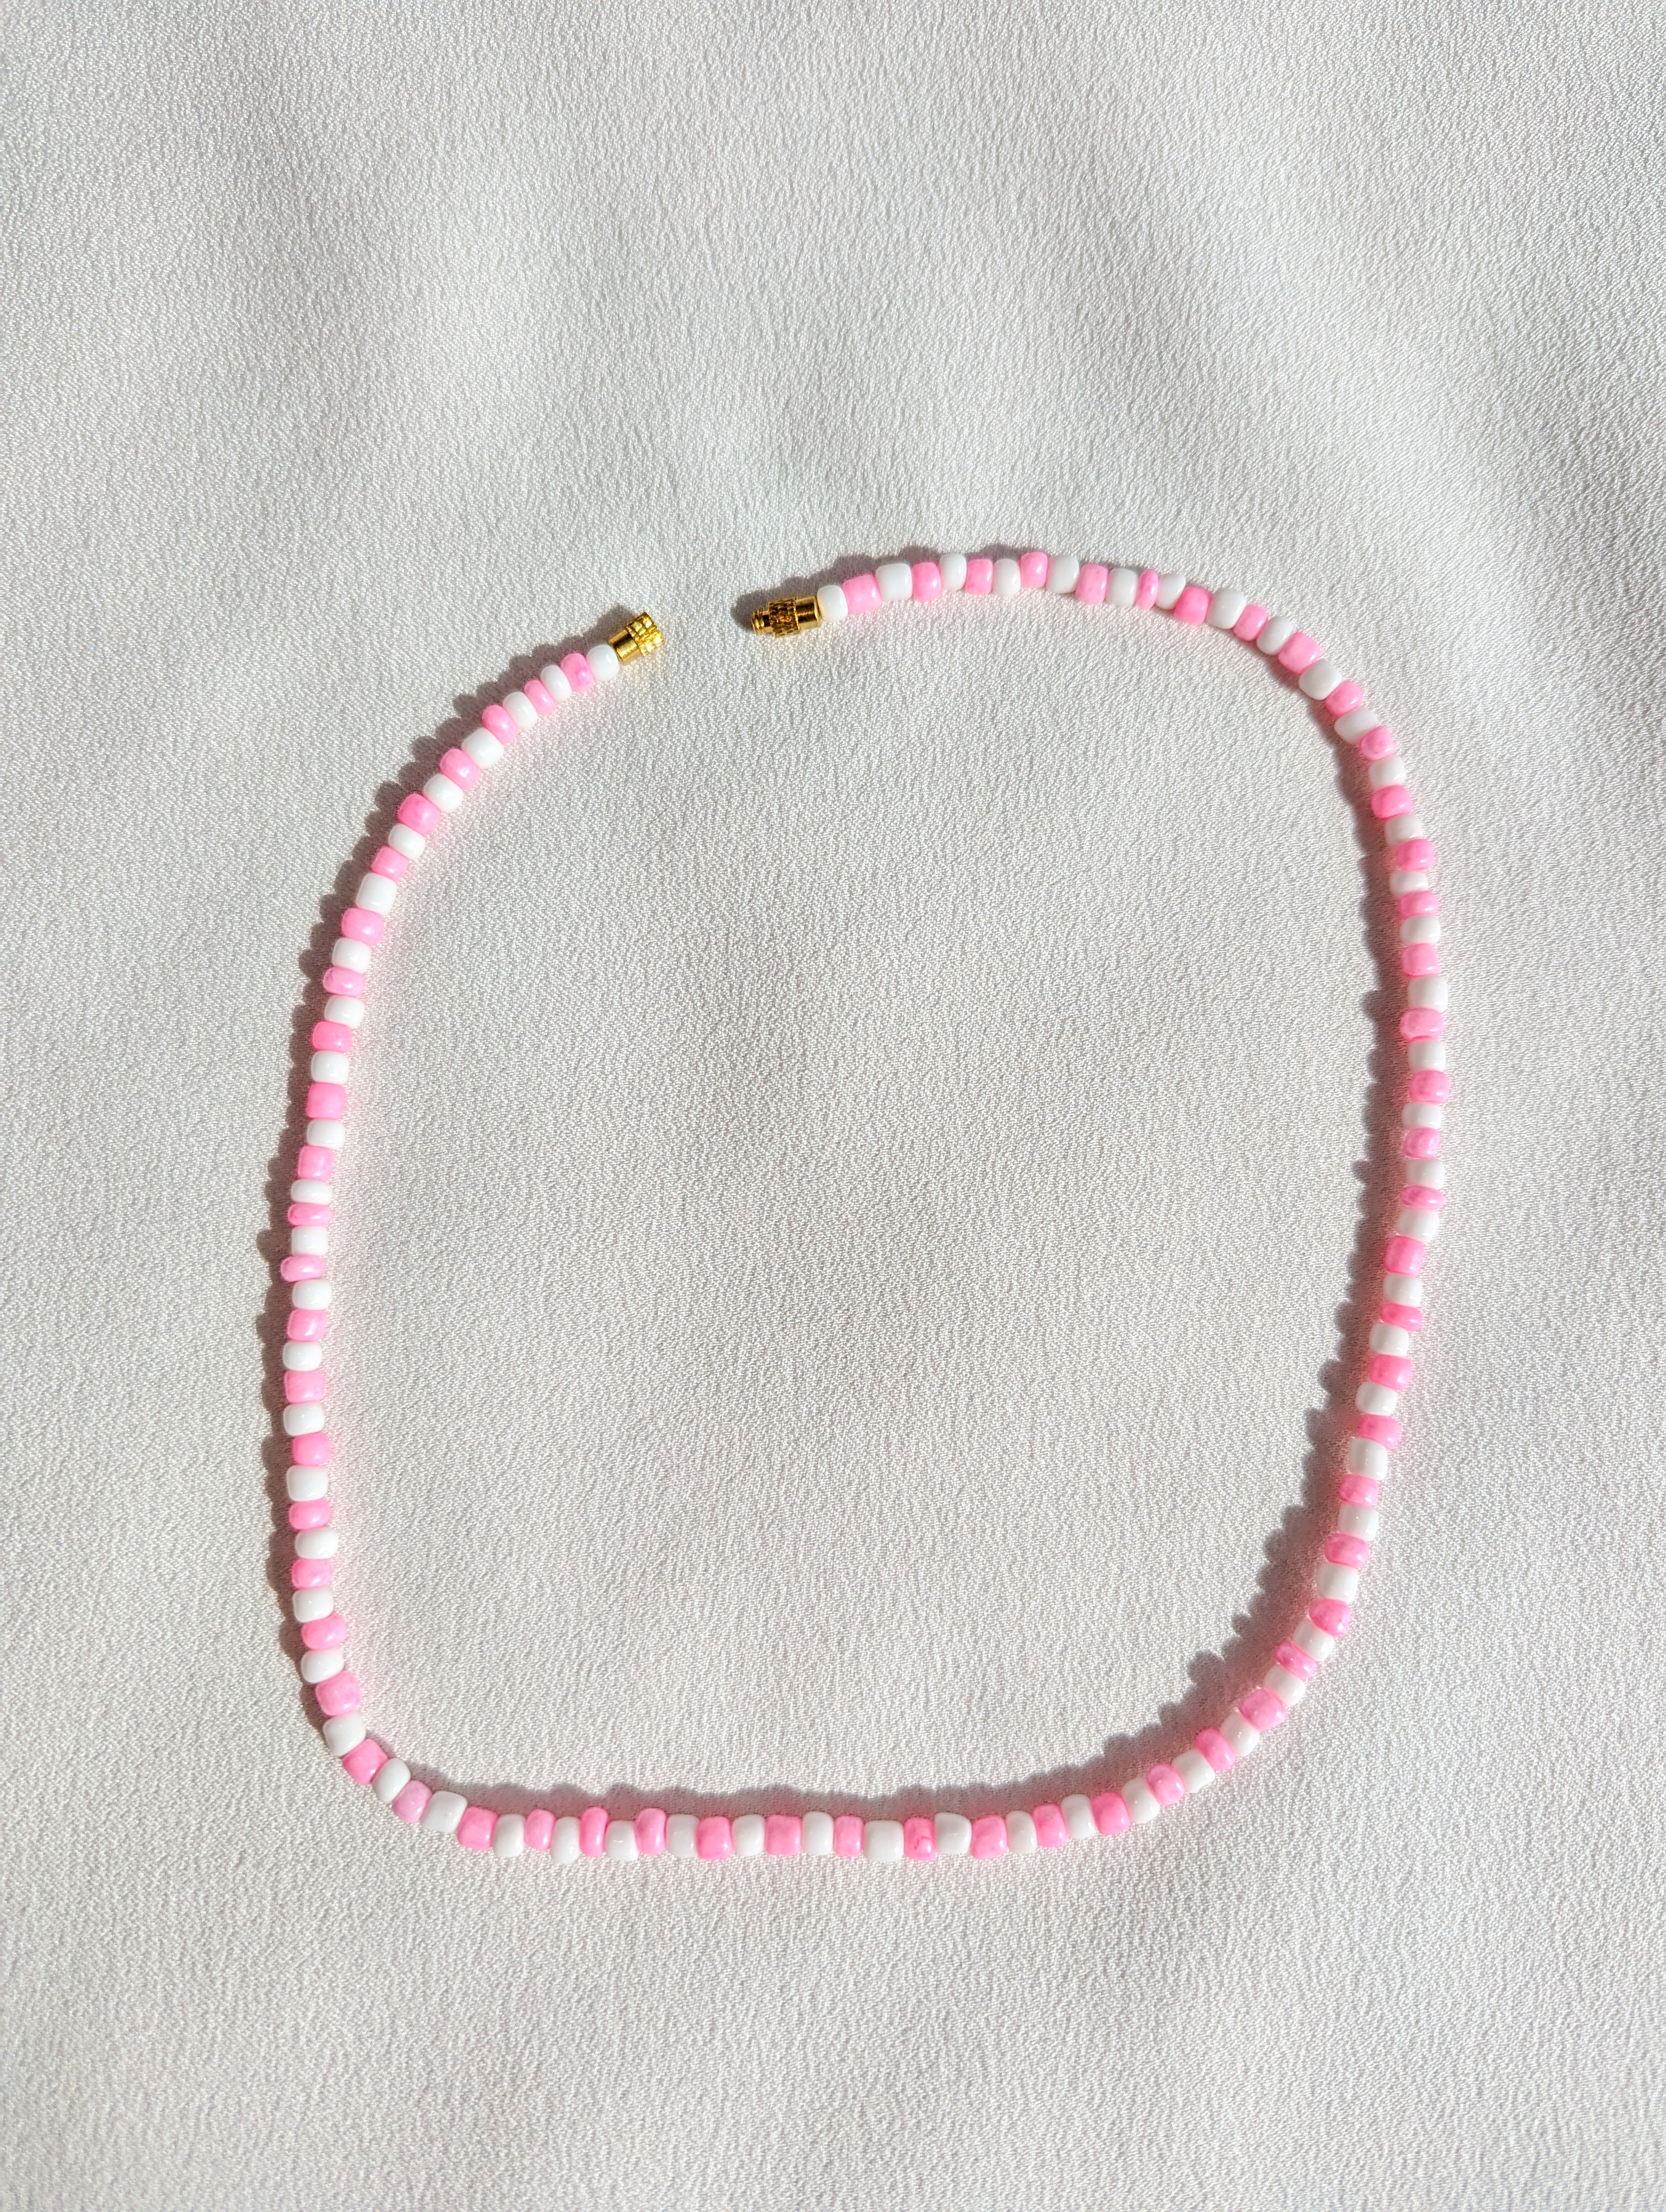 [THE TWO] Necklace: Pink/White [Small Beads]